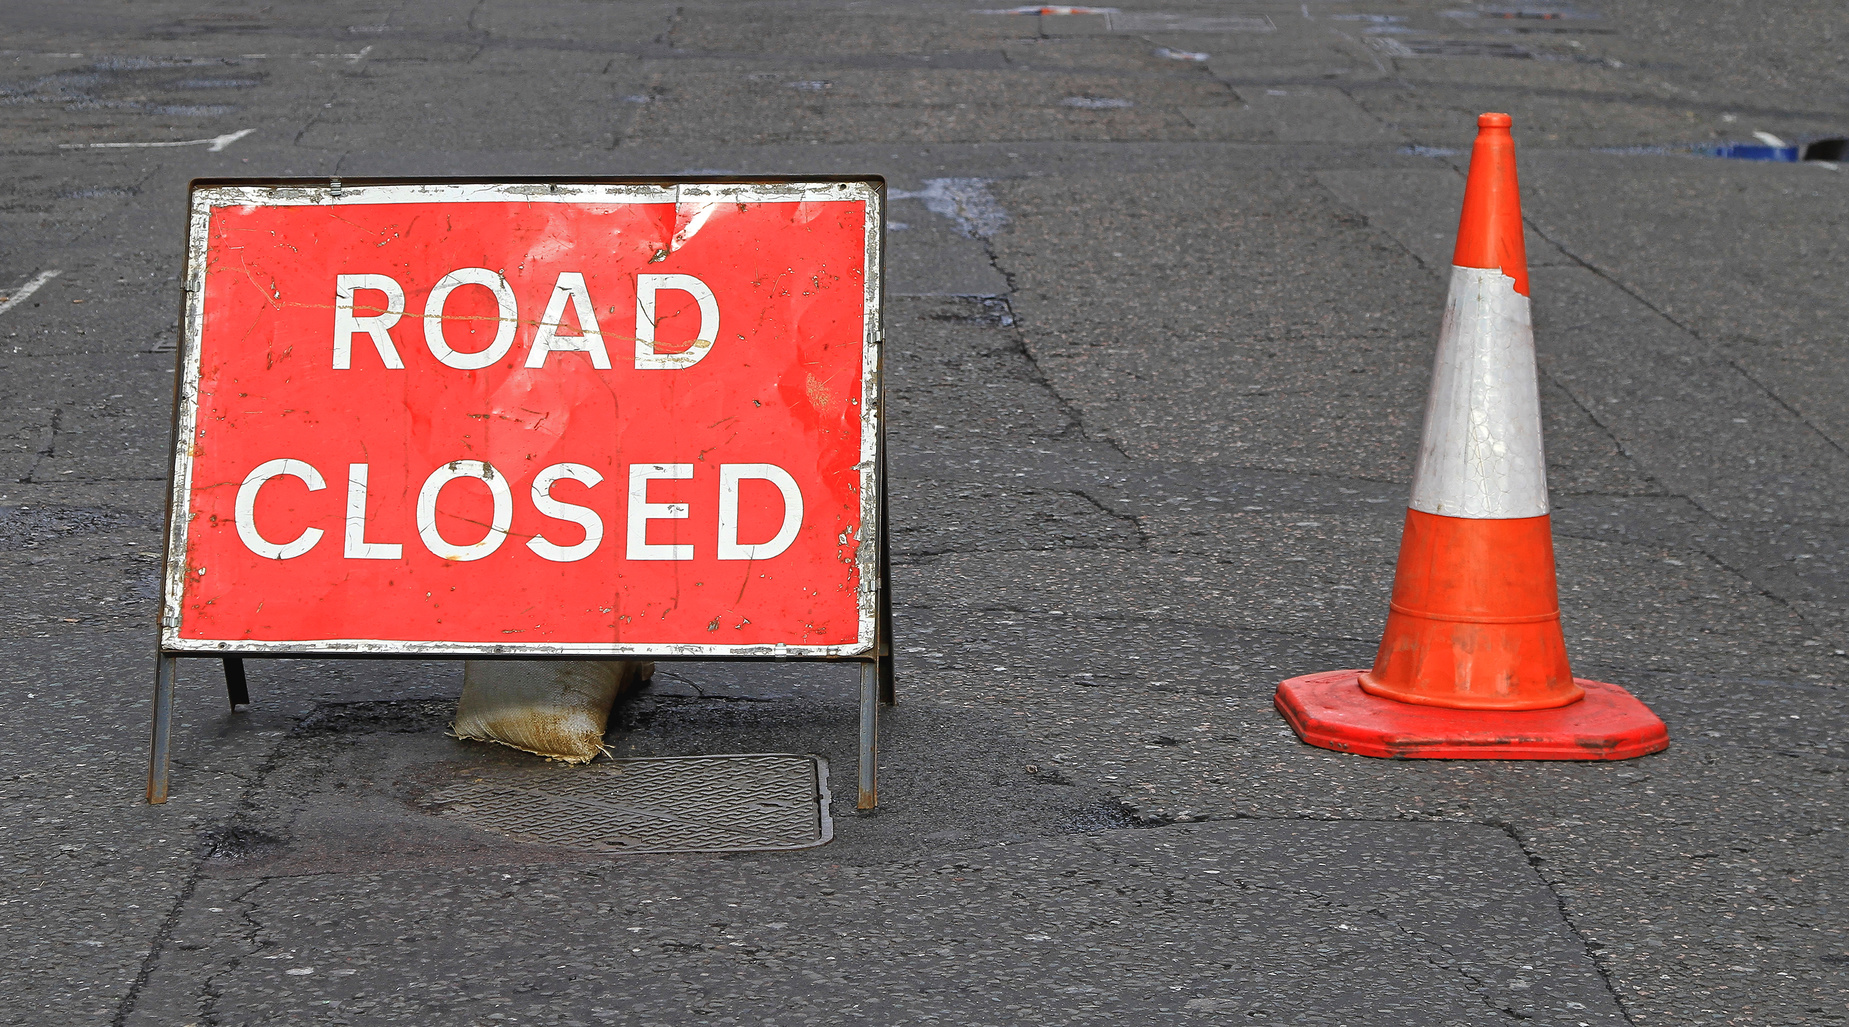 A709 to close for roadworks